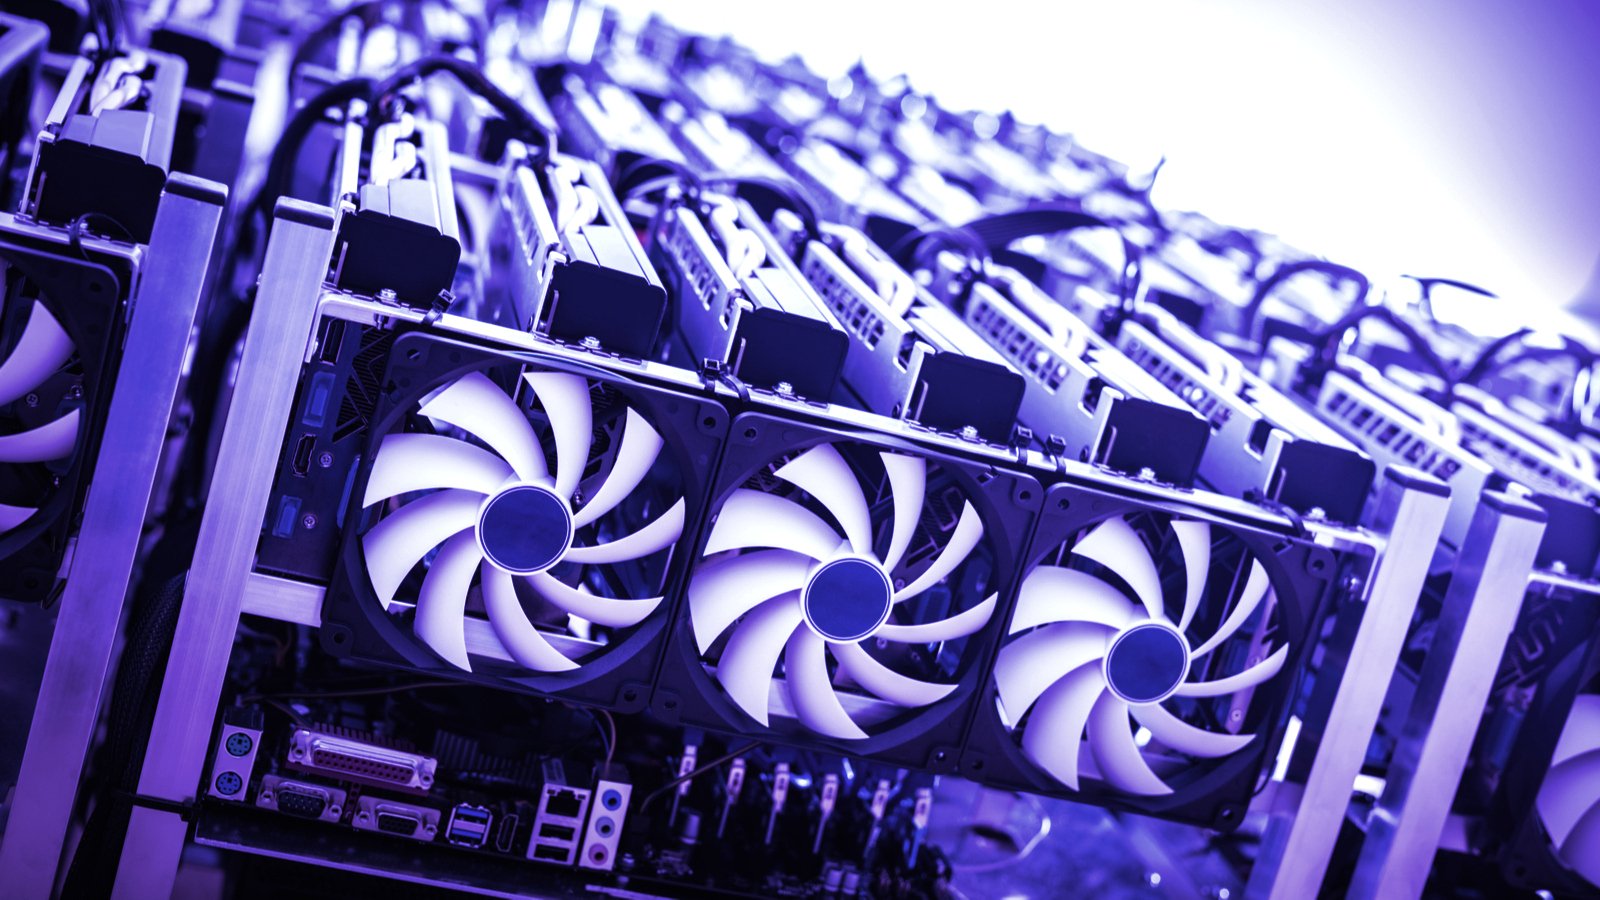 Bitcoin Miner Riot Earned $9.5M for Shutting Down During Texas Heatwave